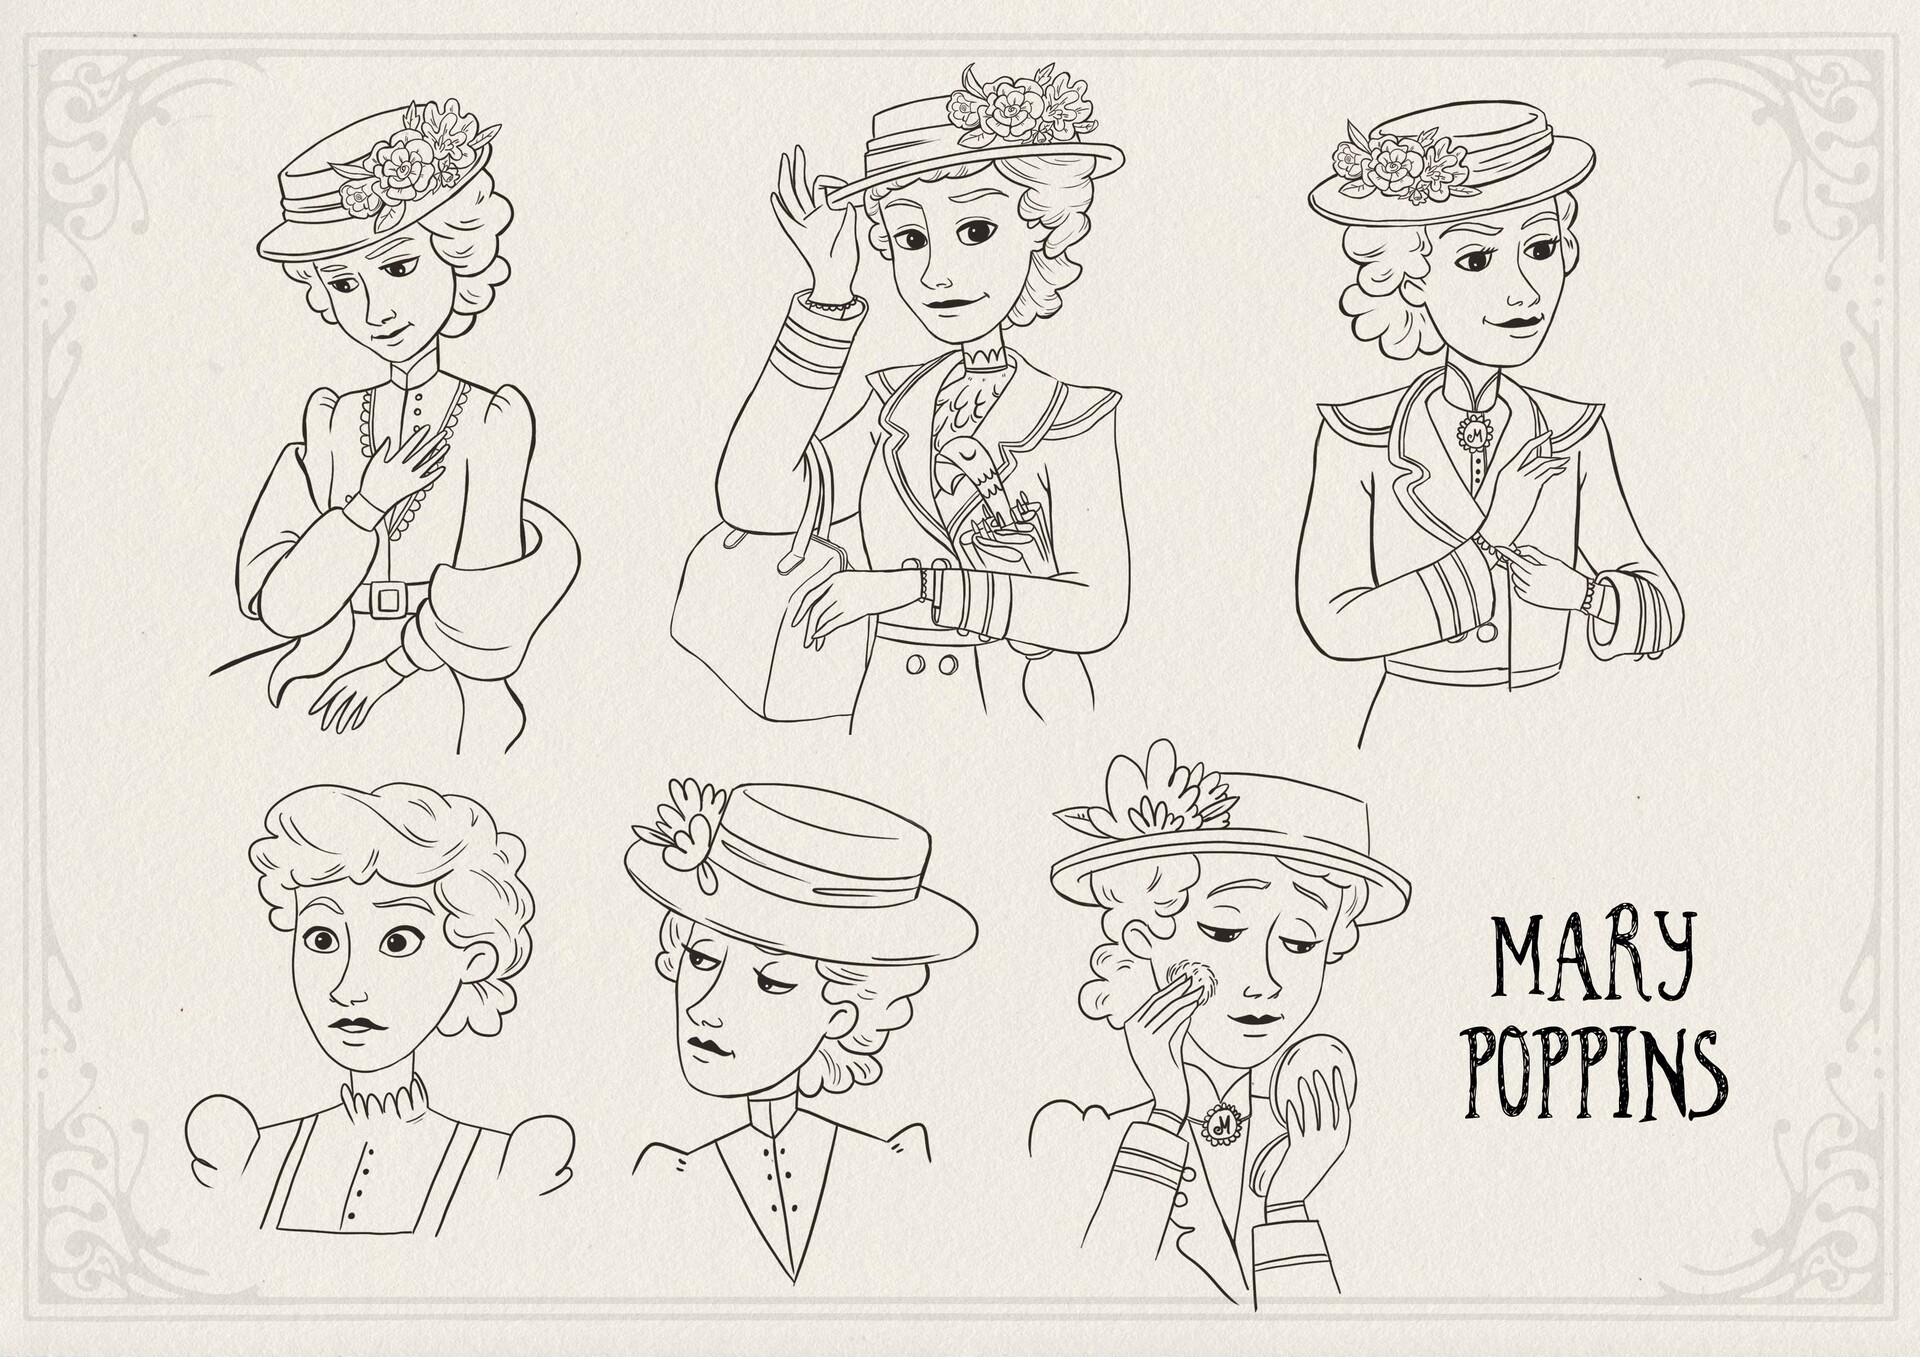 Original MARY POPPINS Costume Sketch Sells For 50000